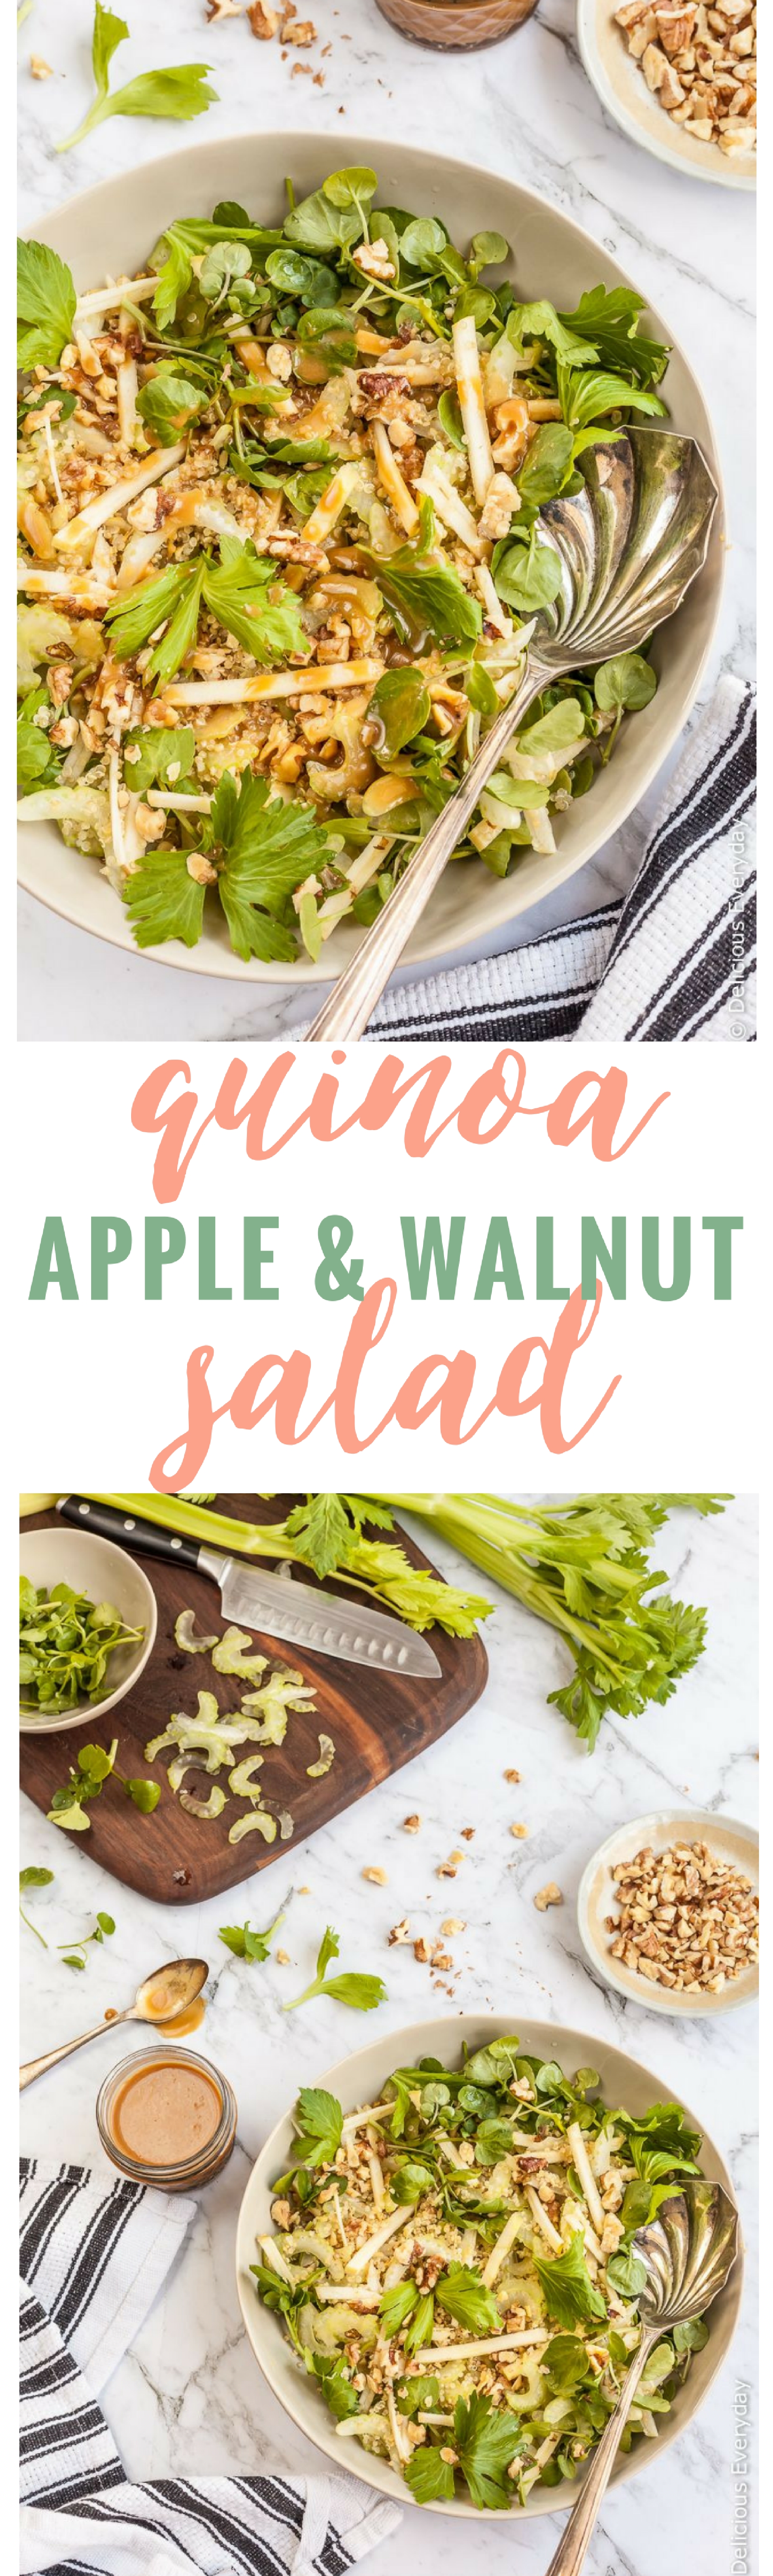 Apple Walnut Salad Recipe - This vegetarian & gluten free Apple Walnut Salad is a great sweet-salty and crunchy salad. Makes a wonderful side dish or a delicious healthy light lunch